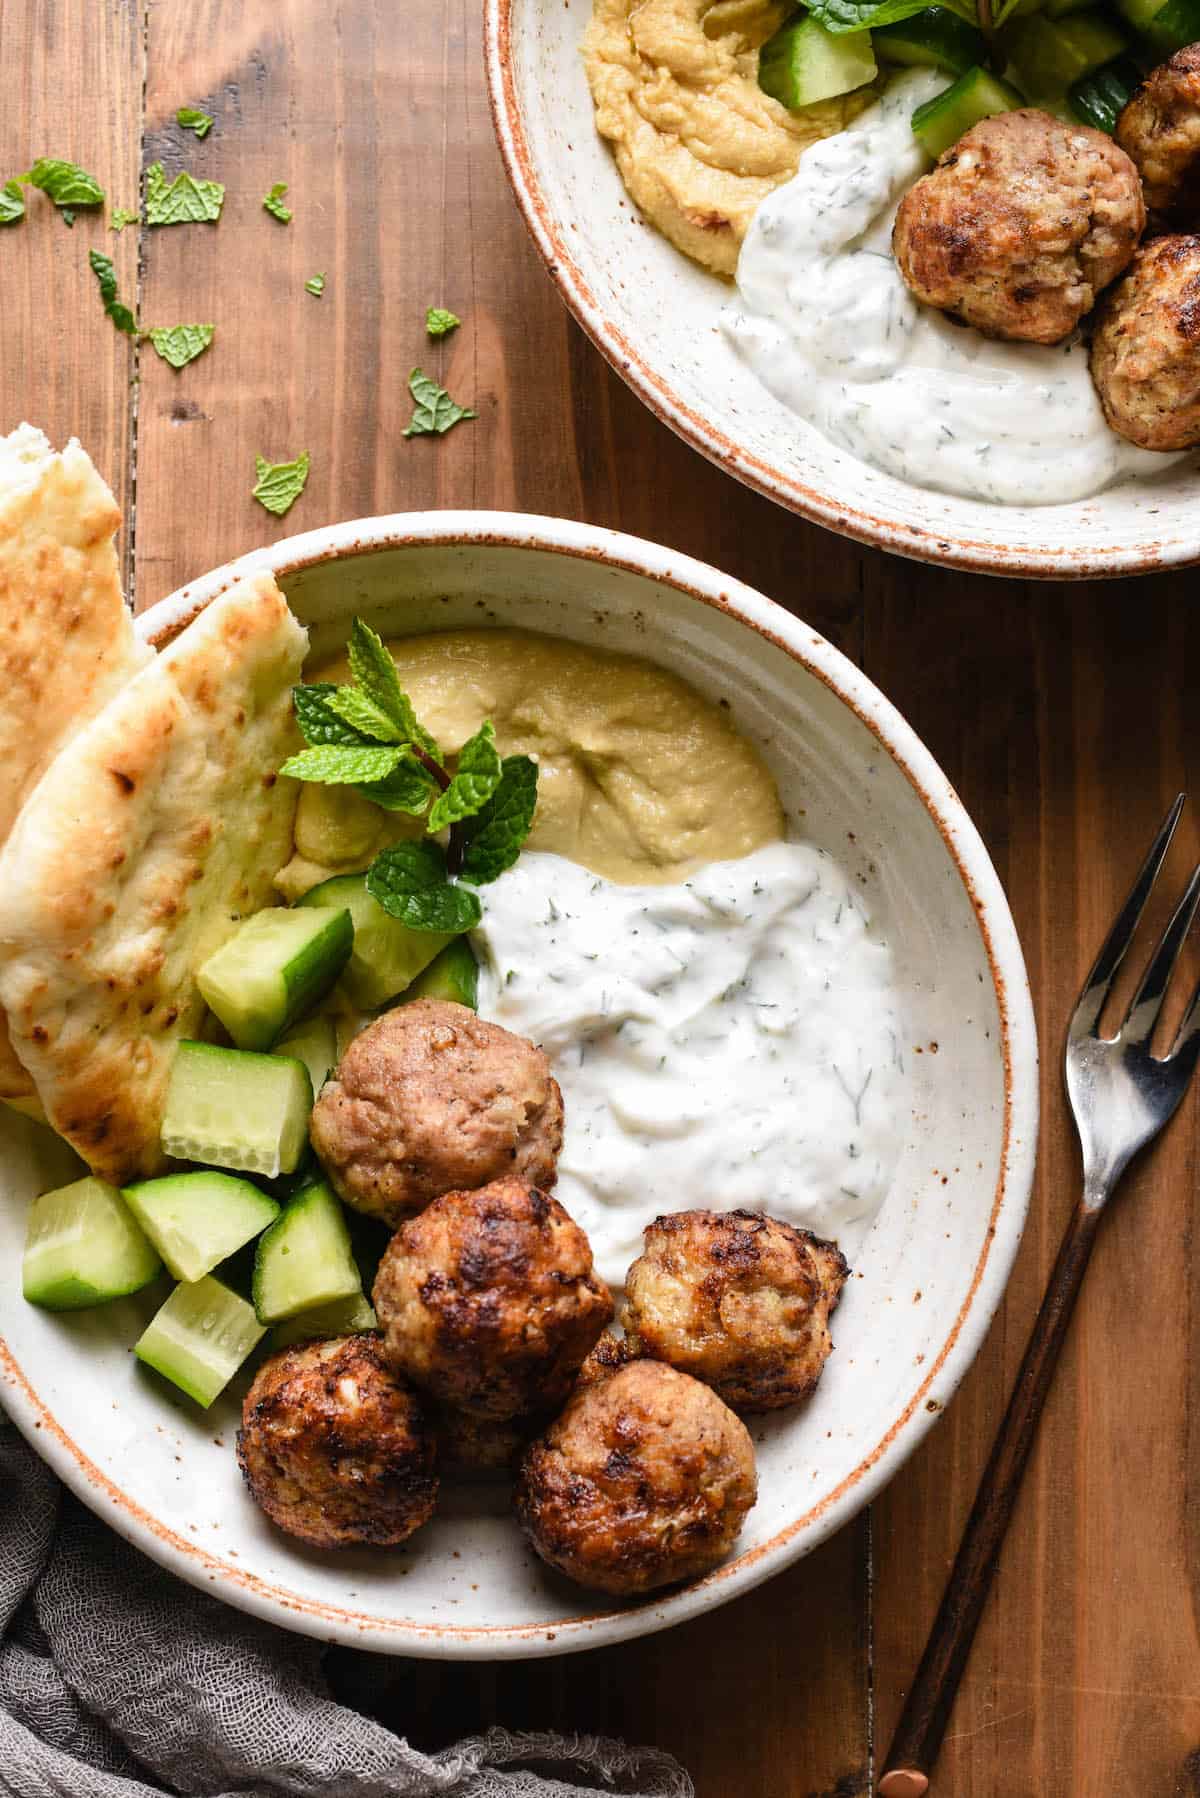 Two bowls filled with meatballs, diced cucumbers, herbed yogurt sauce, hummus and naan bread.